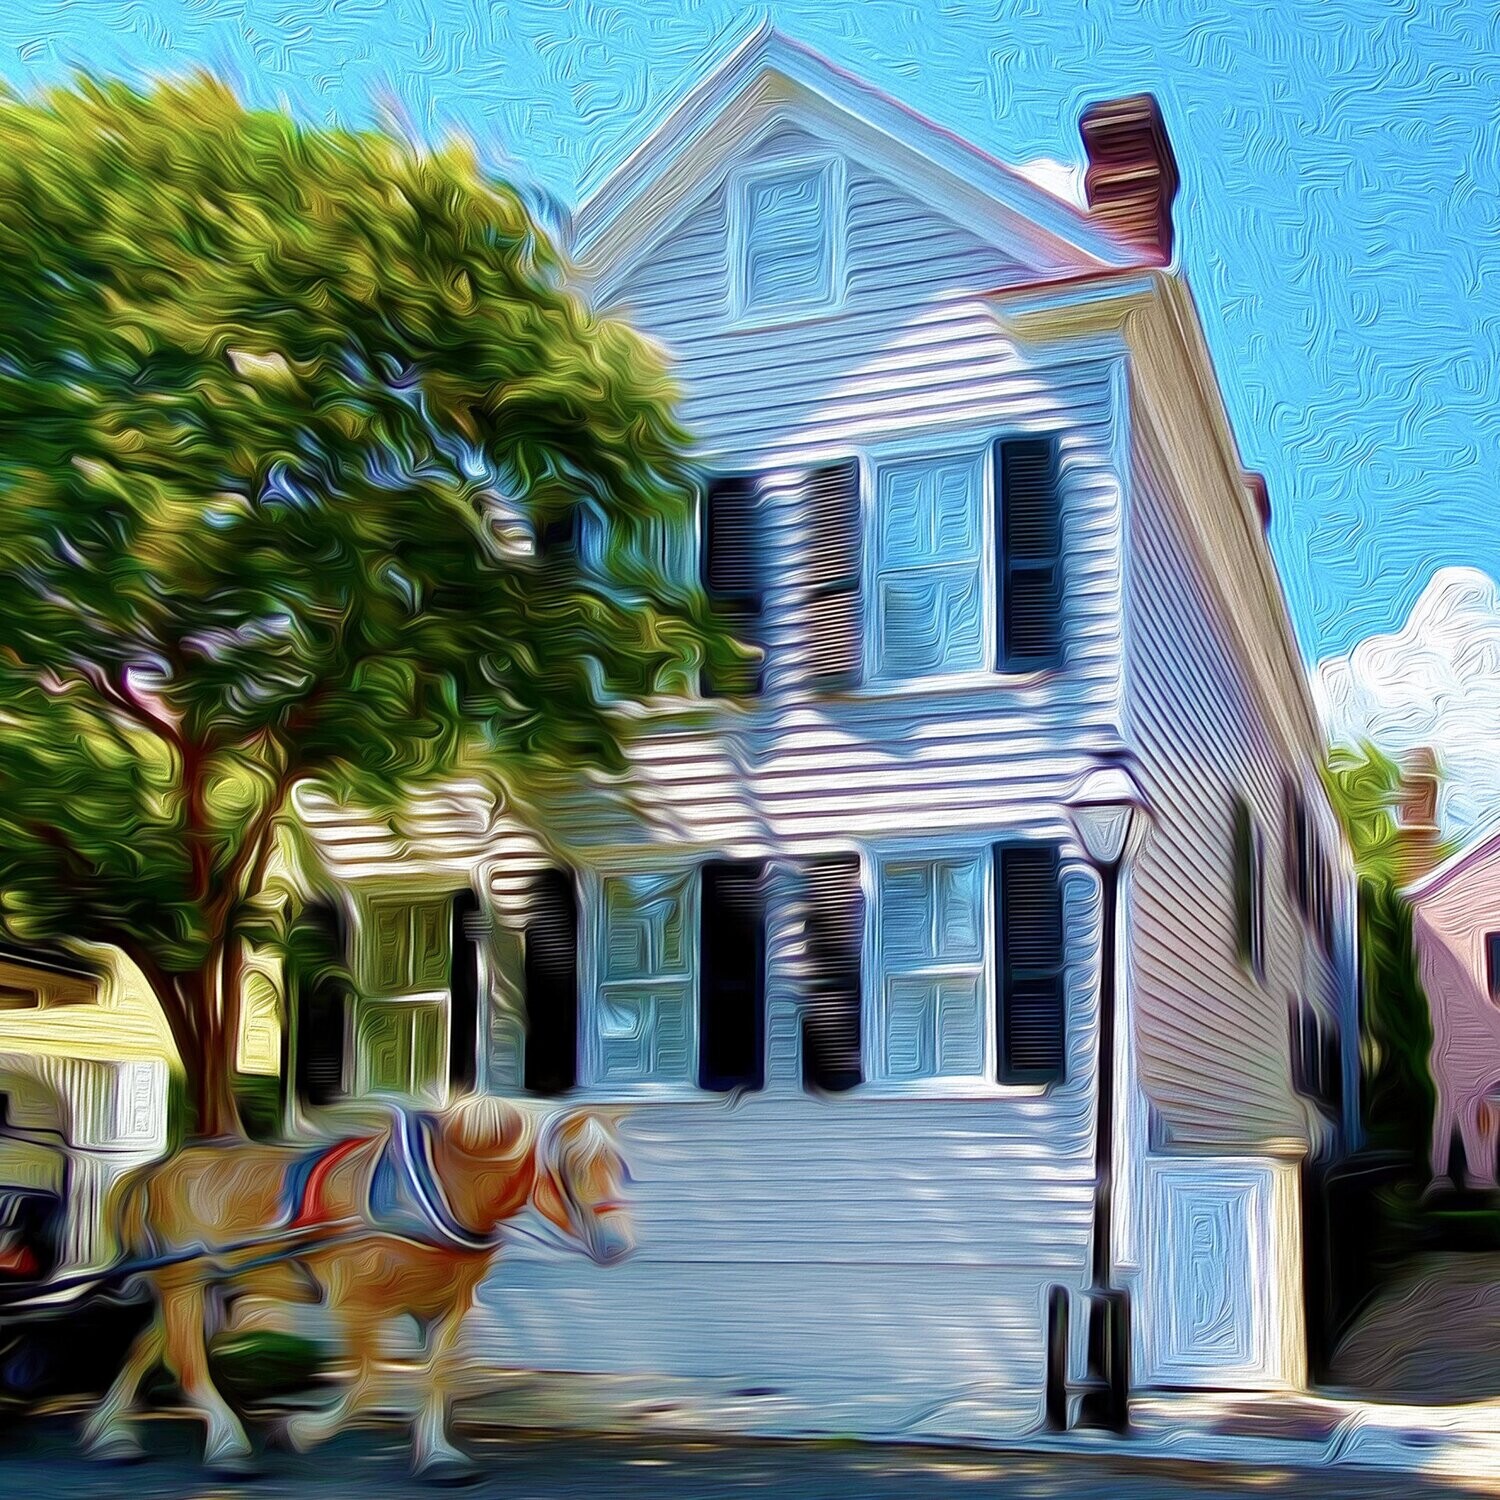 "Horse and Home" by Mark Baratto